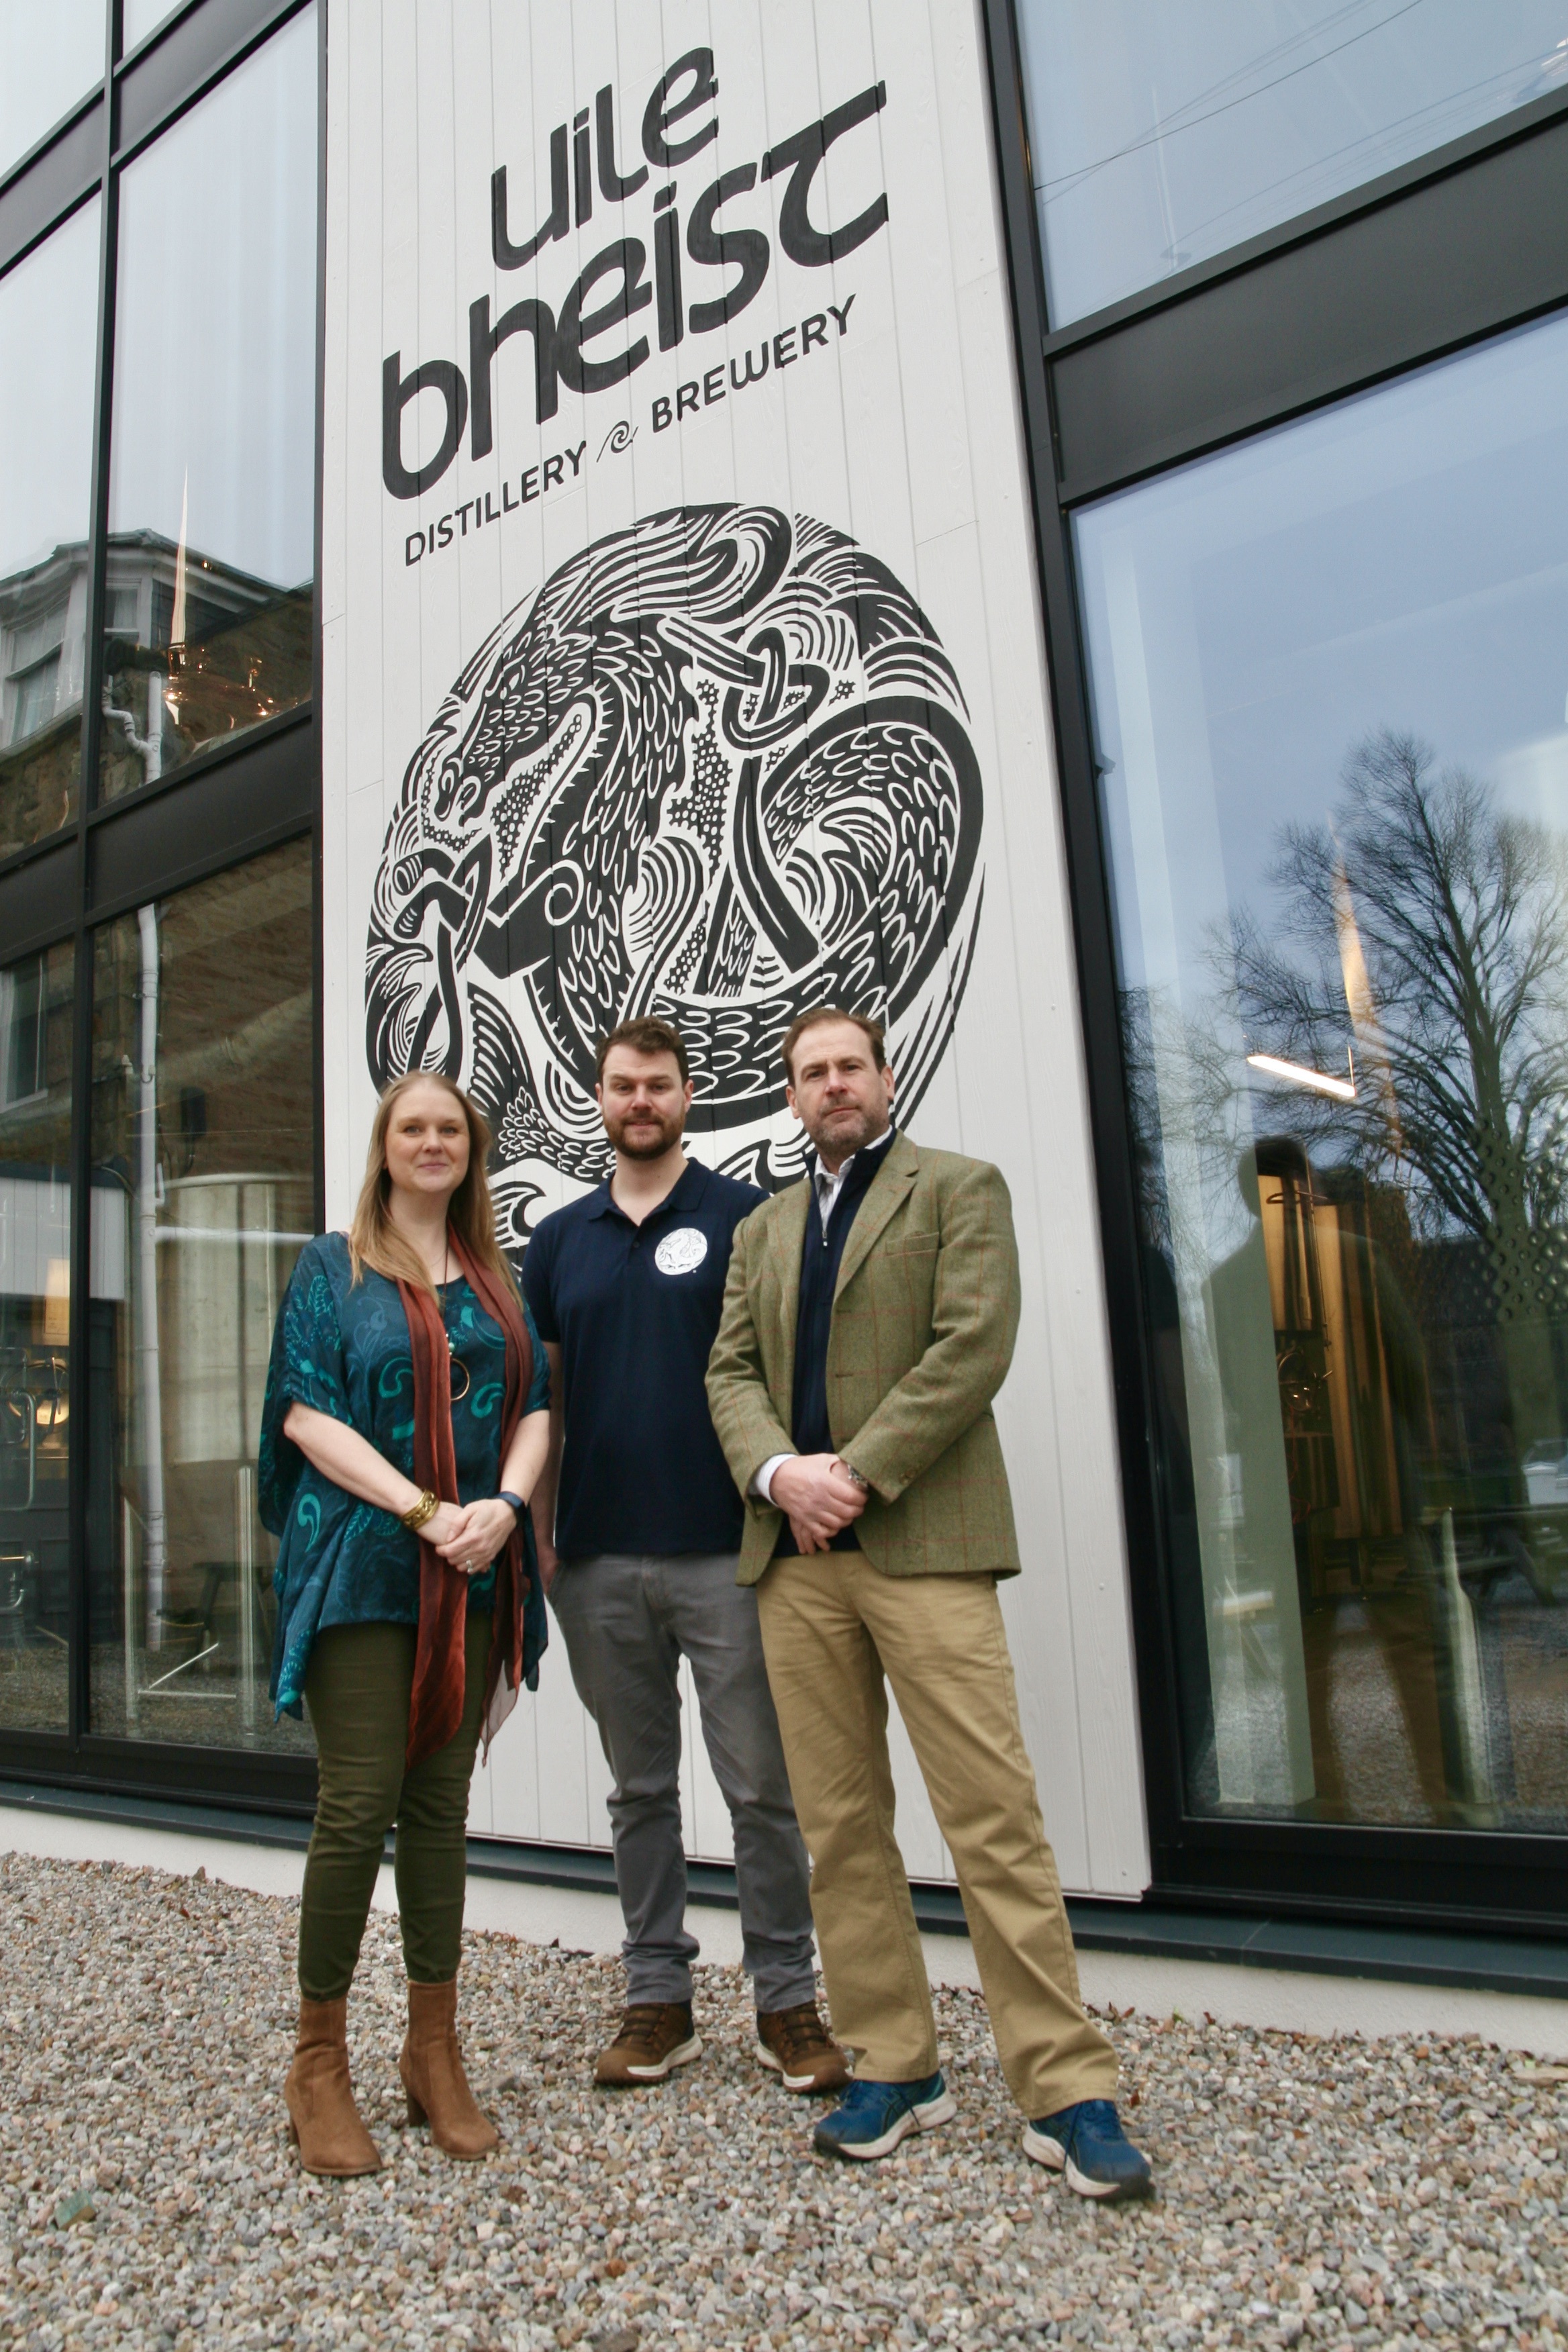 Uile-bheist distillery and brewery opens in Inverness